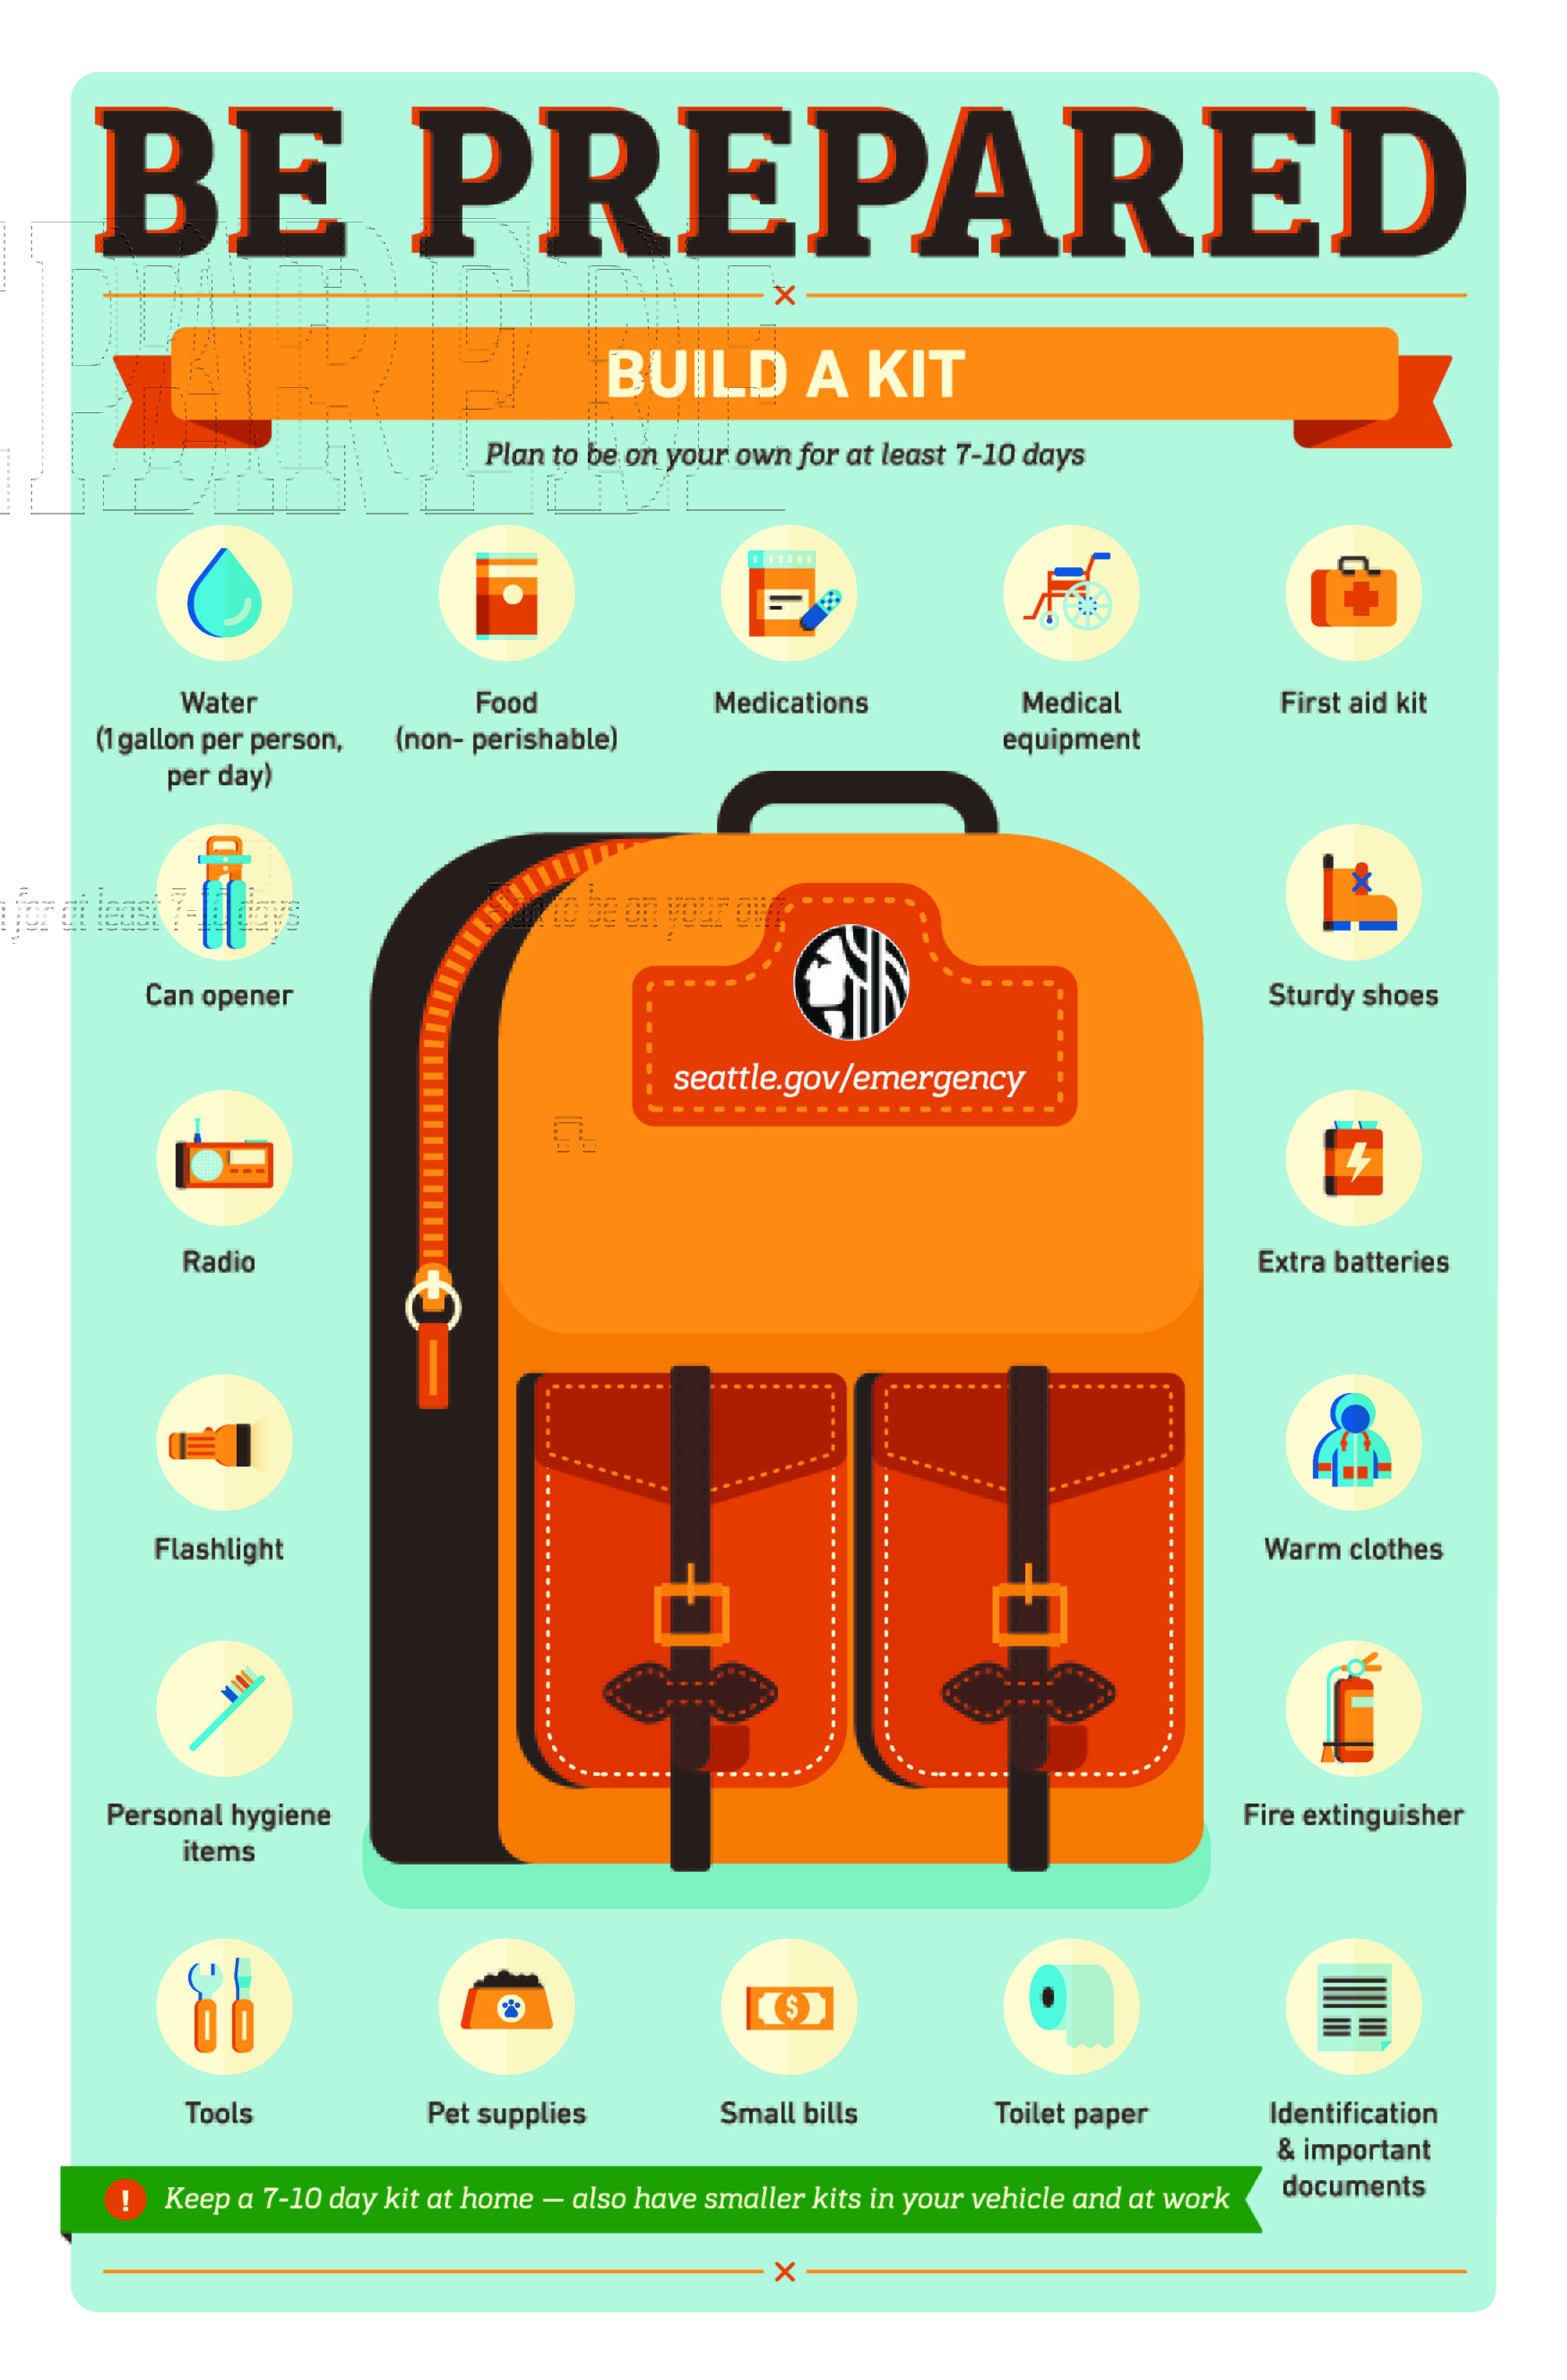 Infographic showing backpack and numerous emergency supply items like food, water, radios, etc.